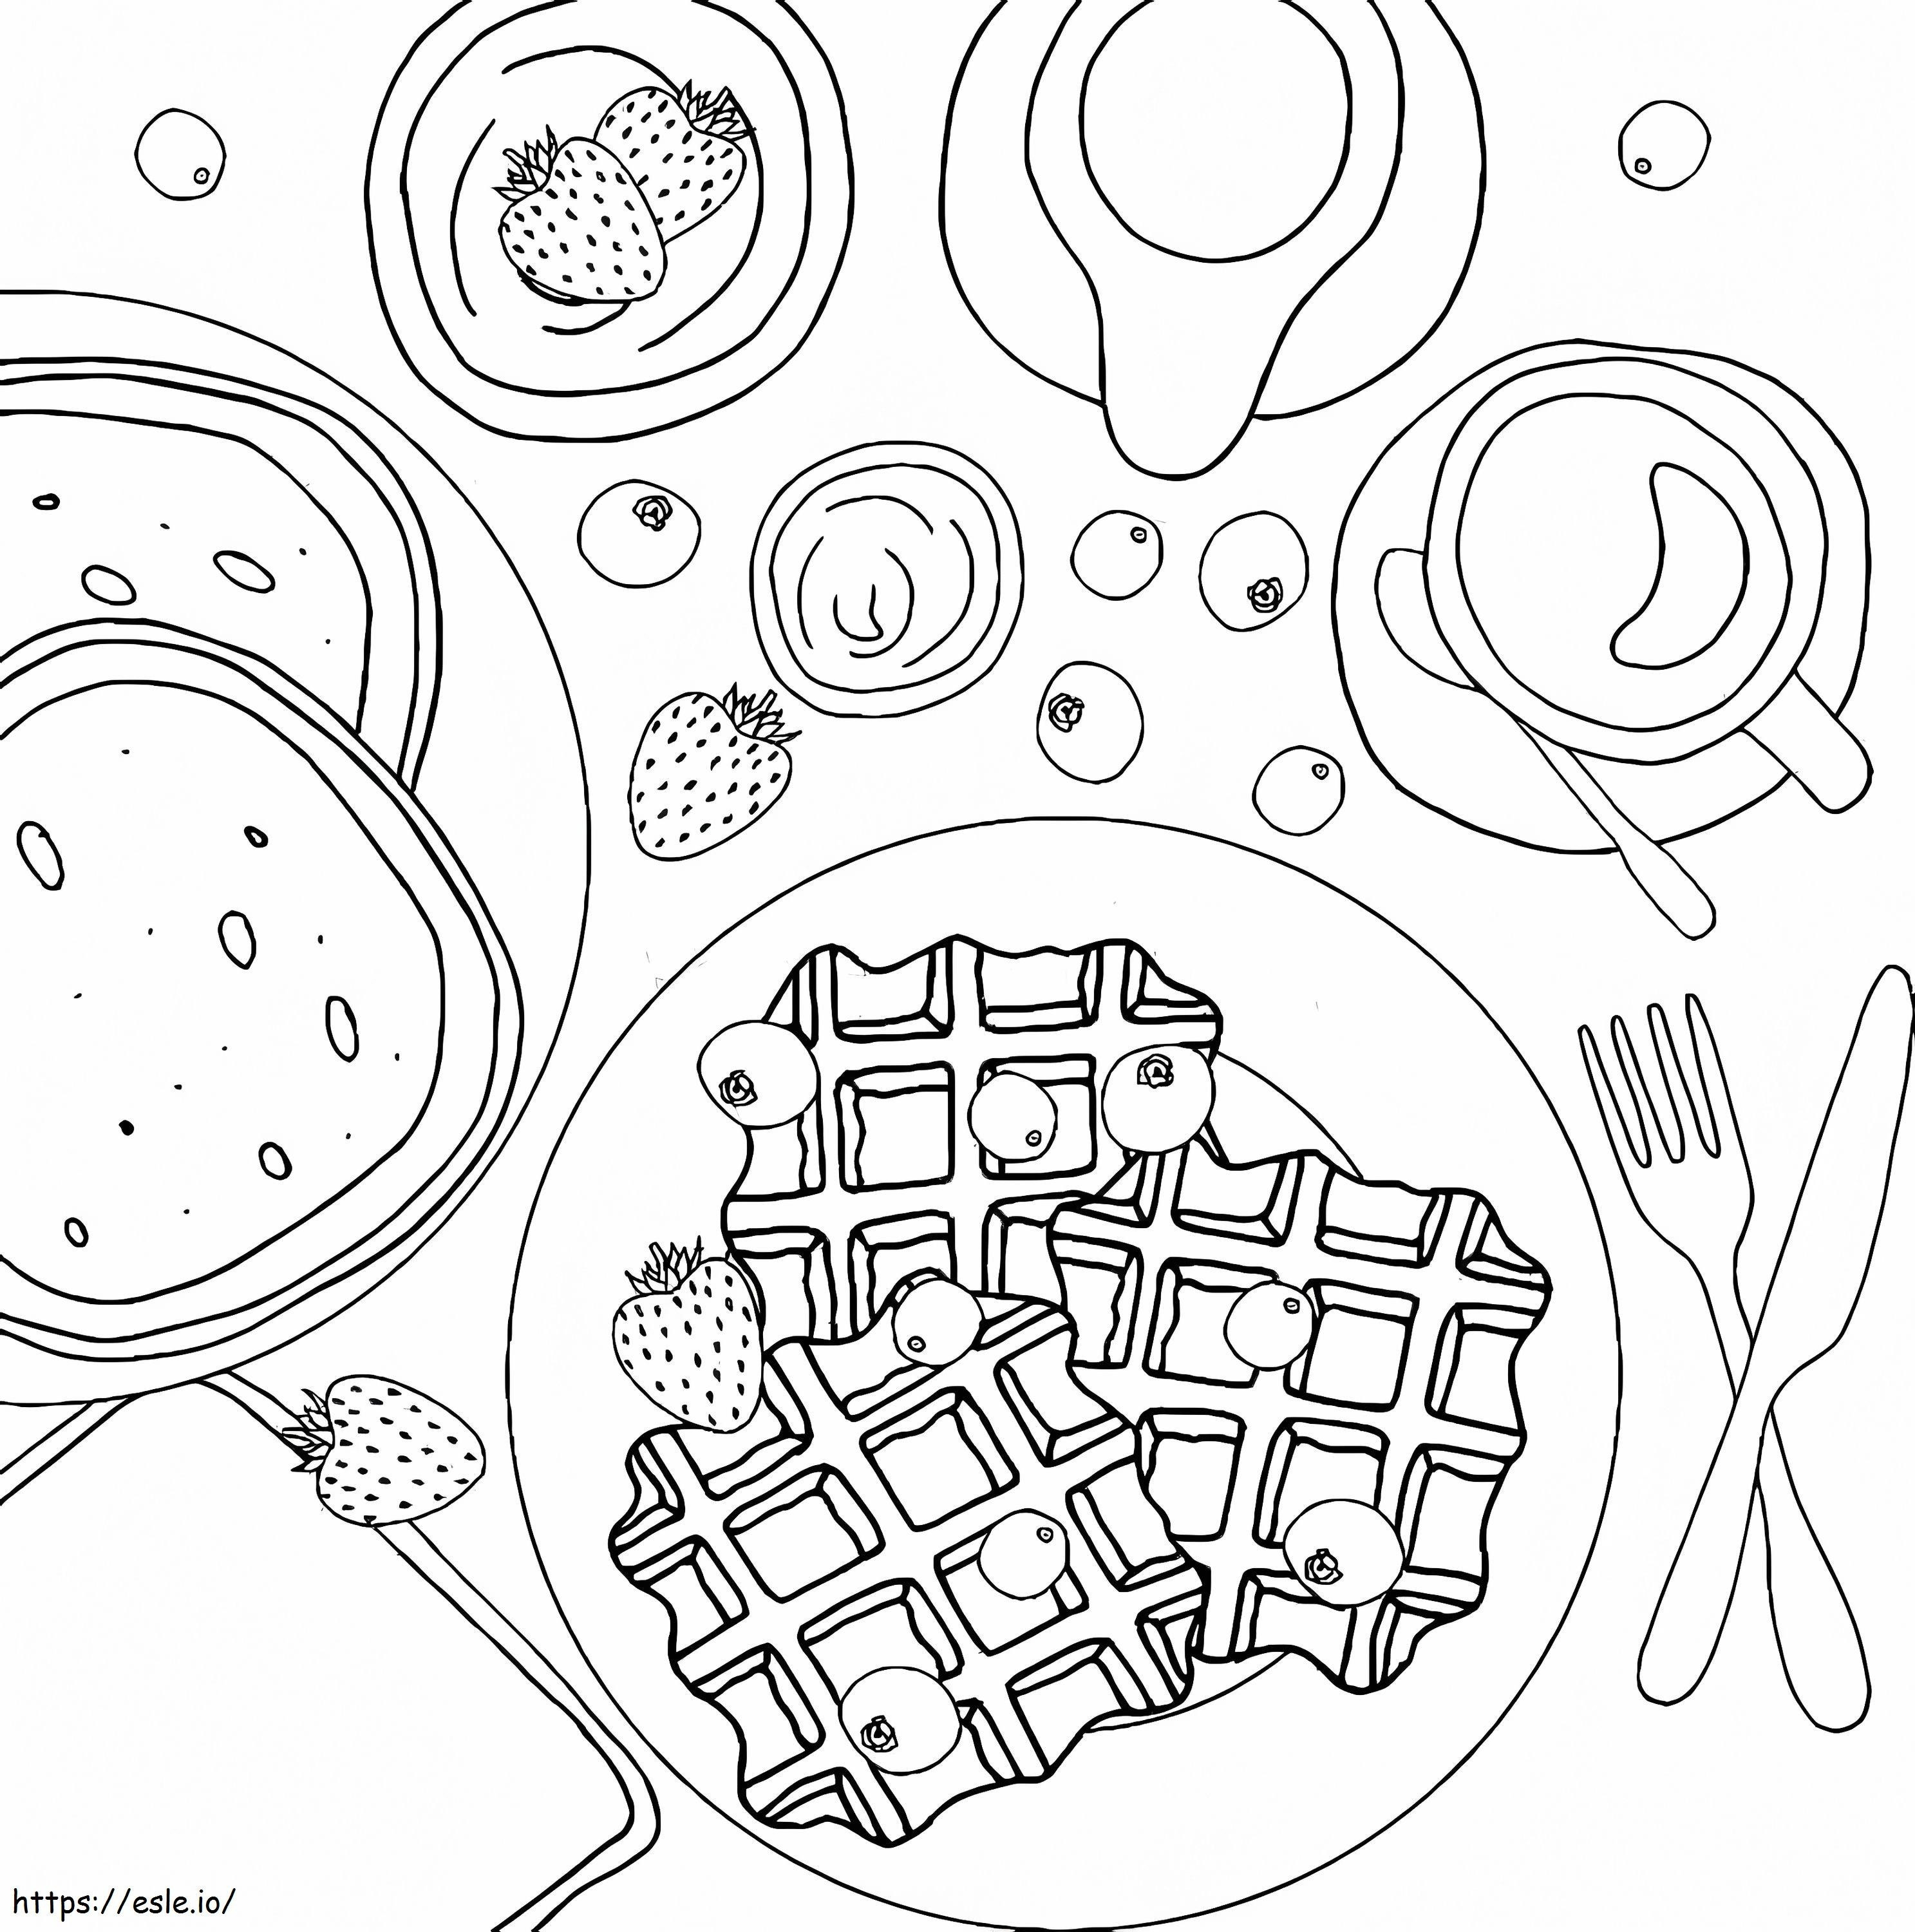 Delicious Waffles coloring page